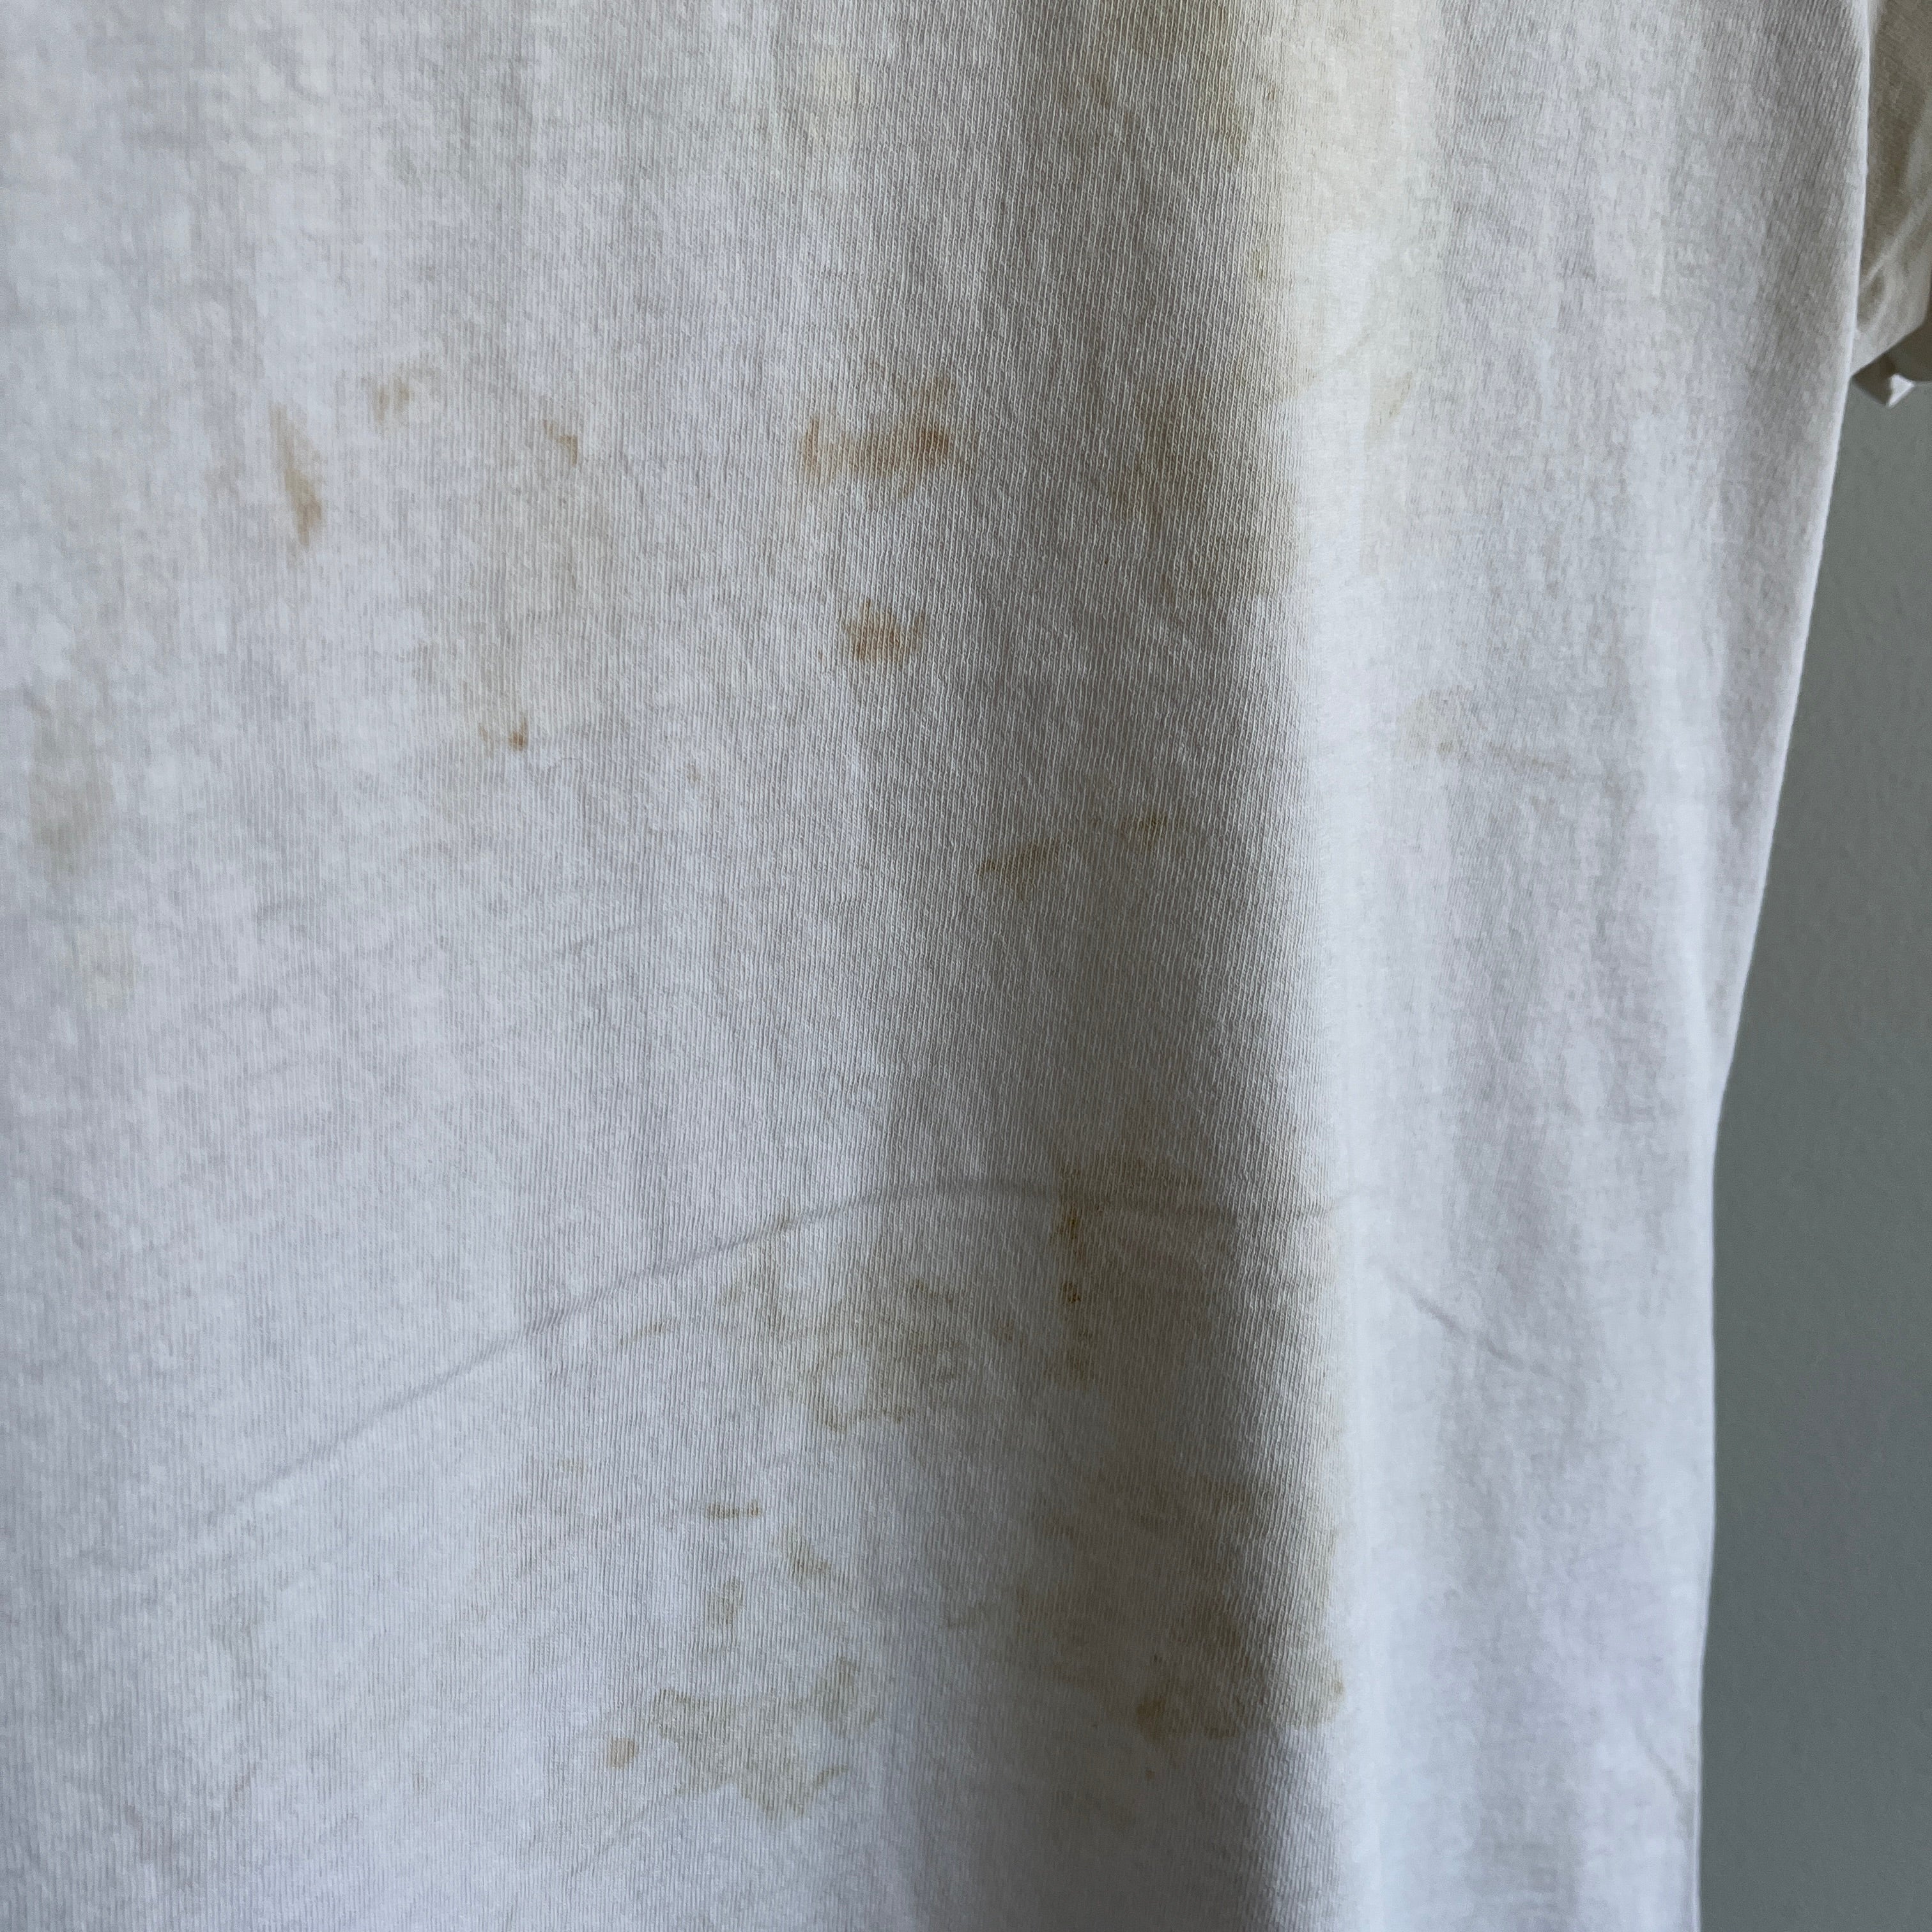 1990s Perfectly Age Stained Blank White (Used to be) T-Shirt